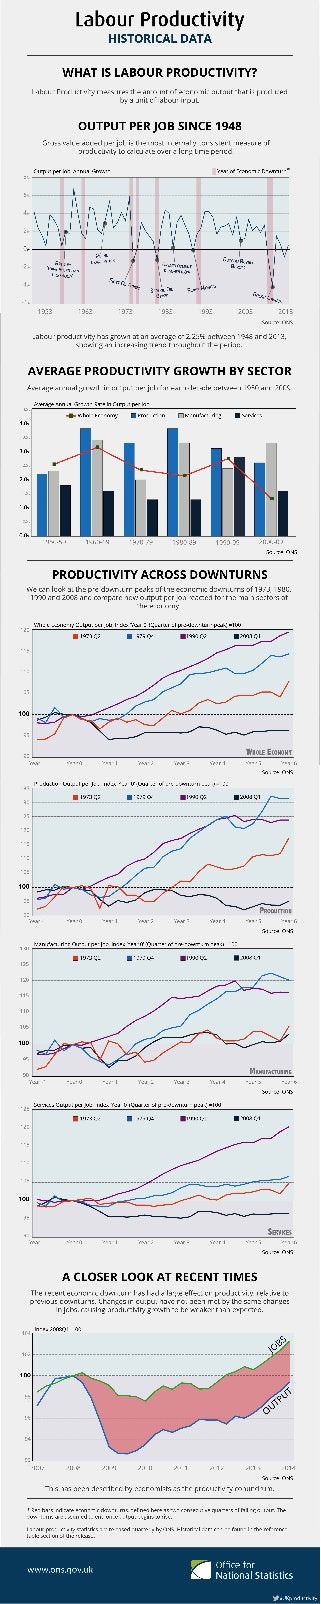 Labour Productivity - Infographic on Historical Data